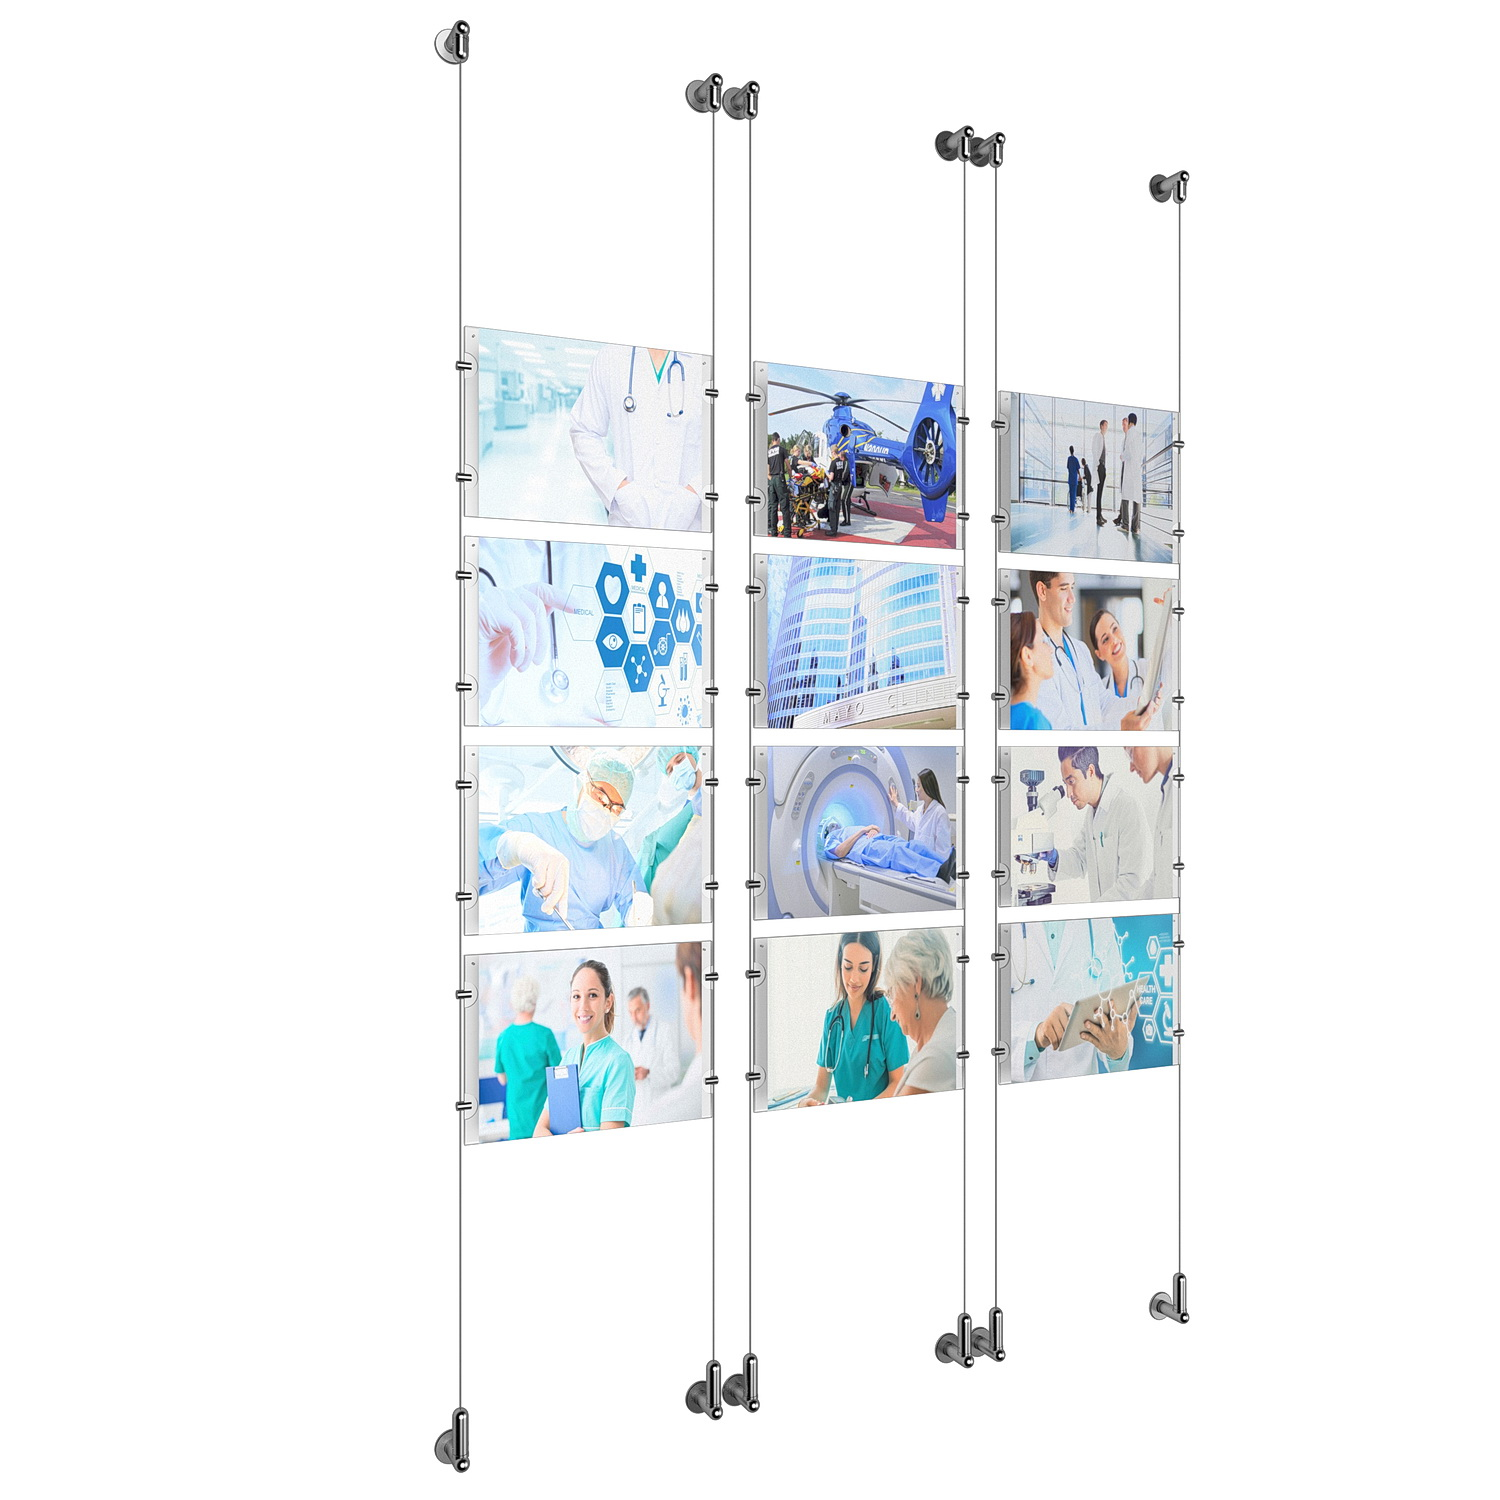 (12) 11'' Width x 8-1/2'' Height Clear Acrylic Frame & (6) Wall-to-Wall Aluminum Clear Anodized Cable Systems with (48) Single-Sided Panel Grippers